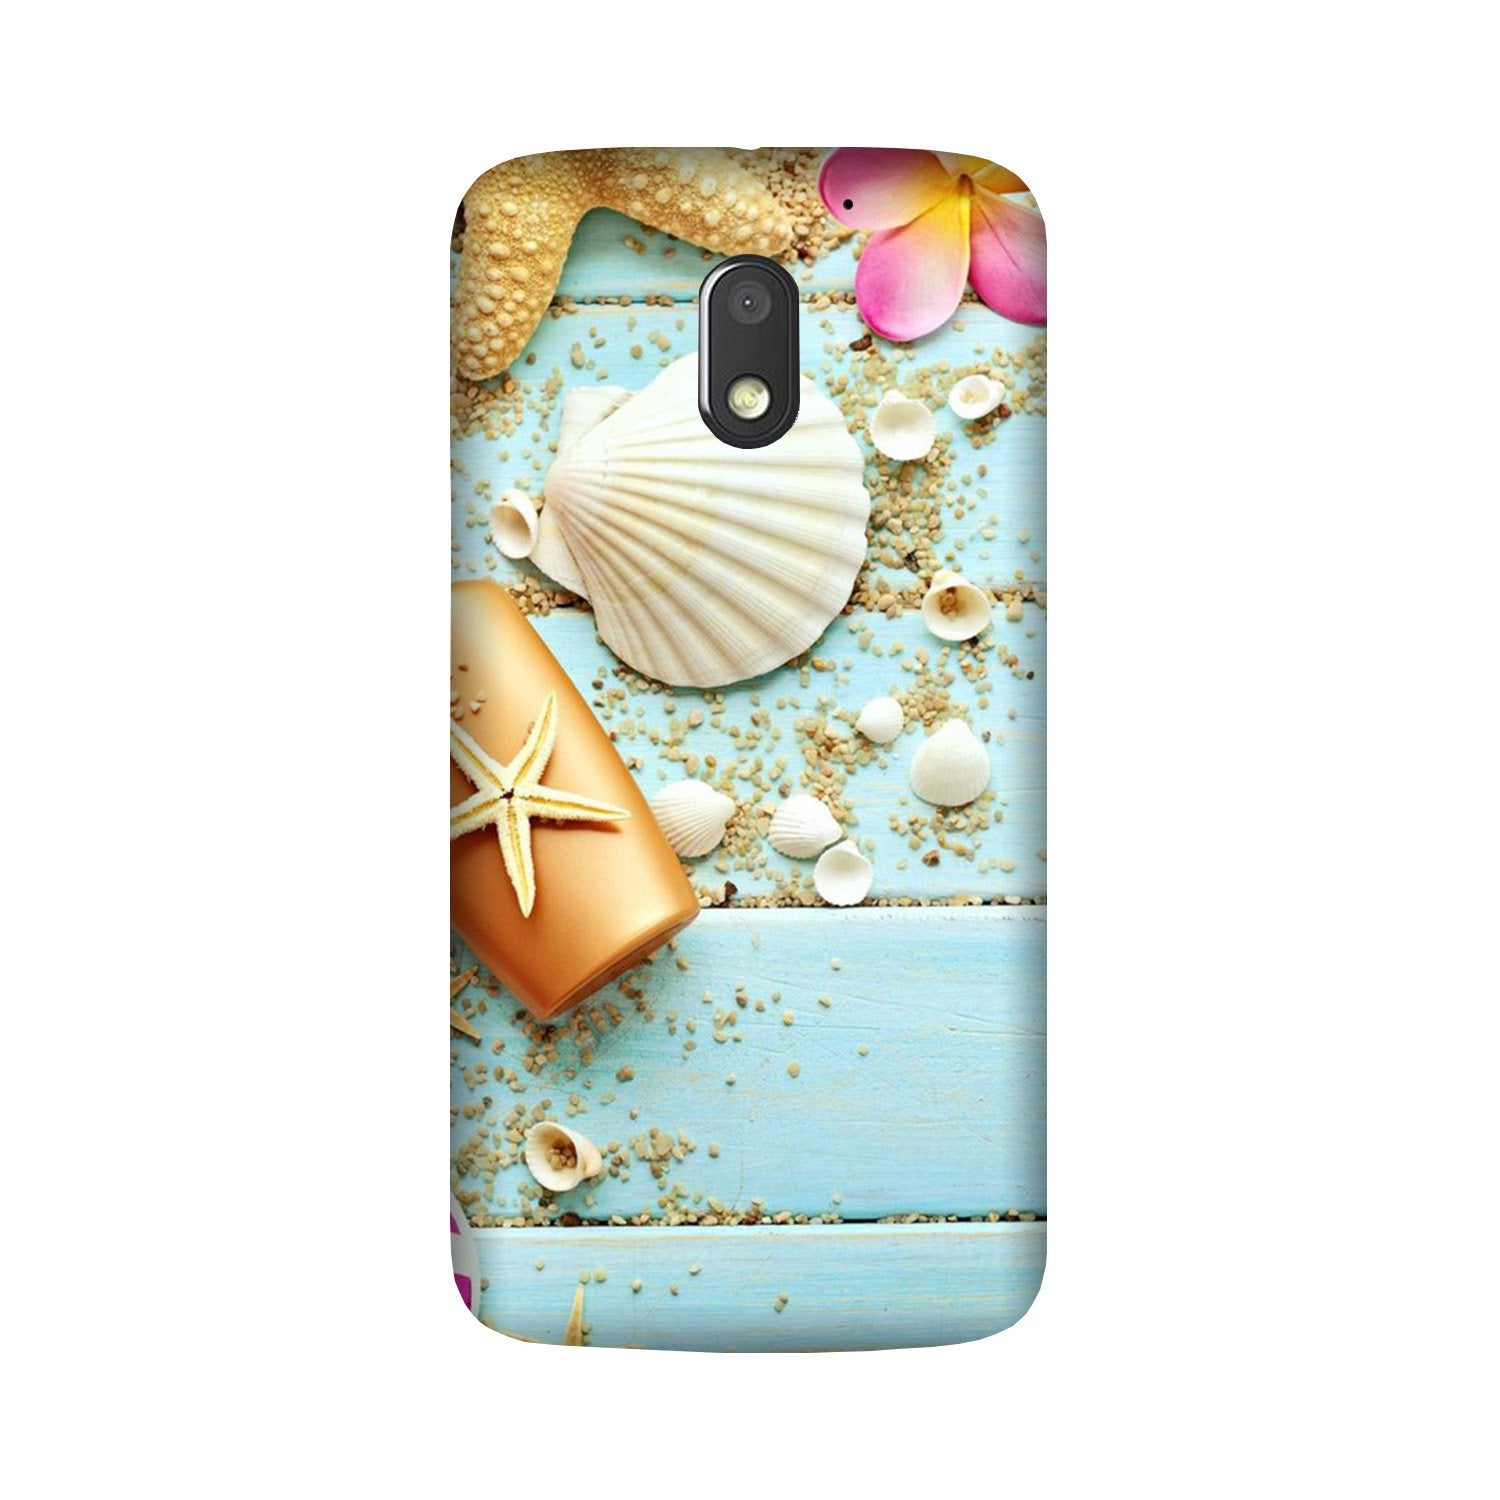 Sea Shells Case for Moto G4 Play